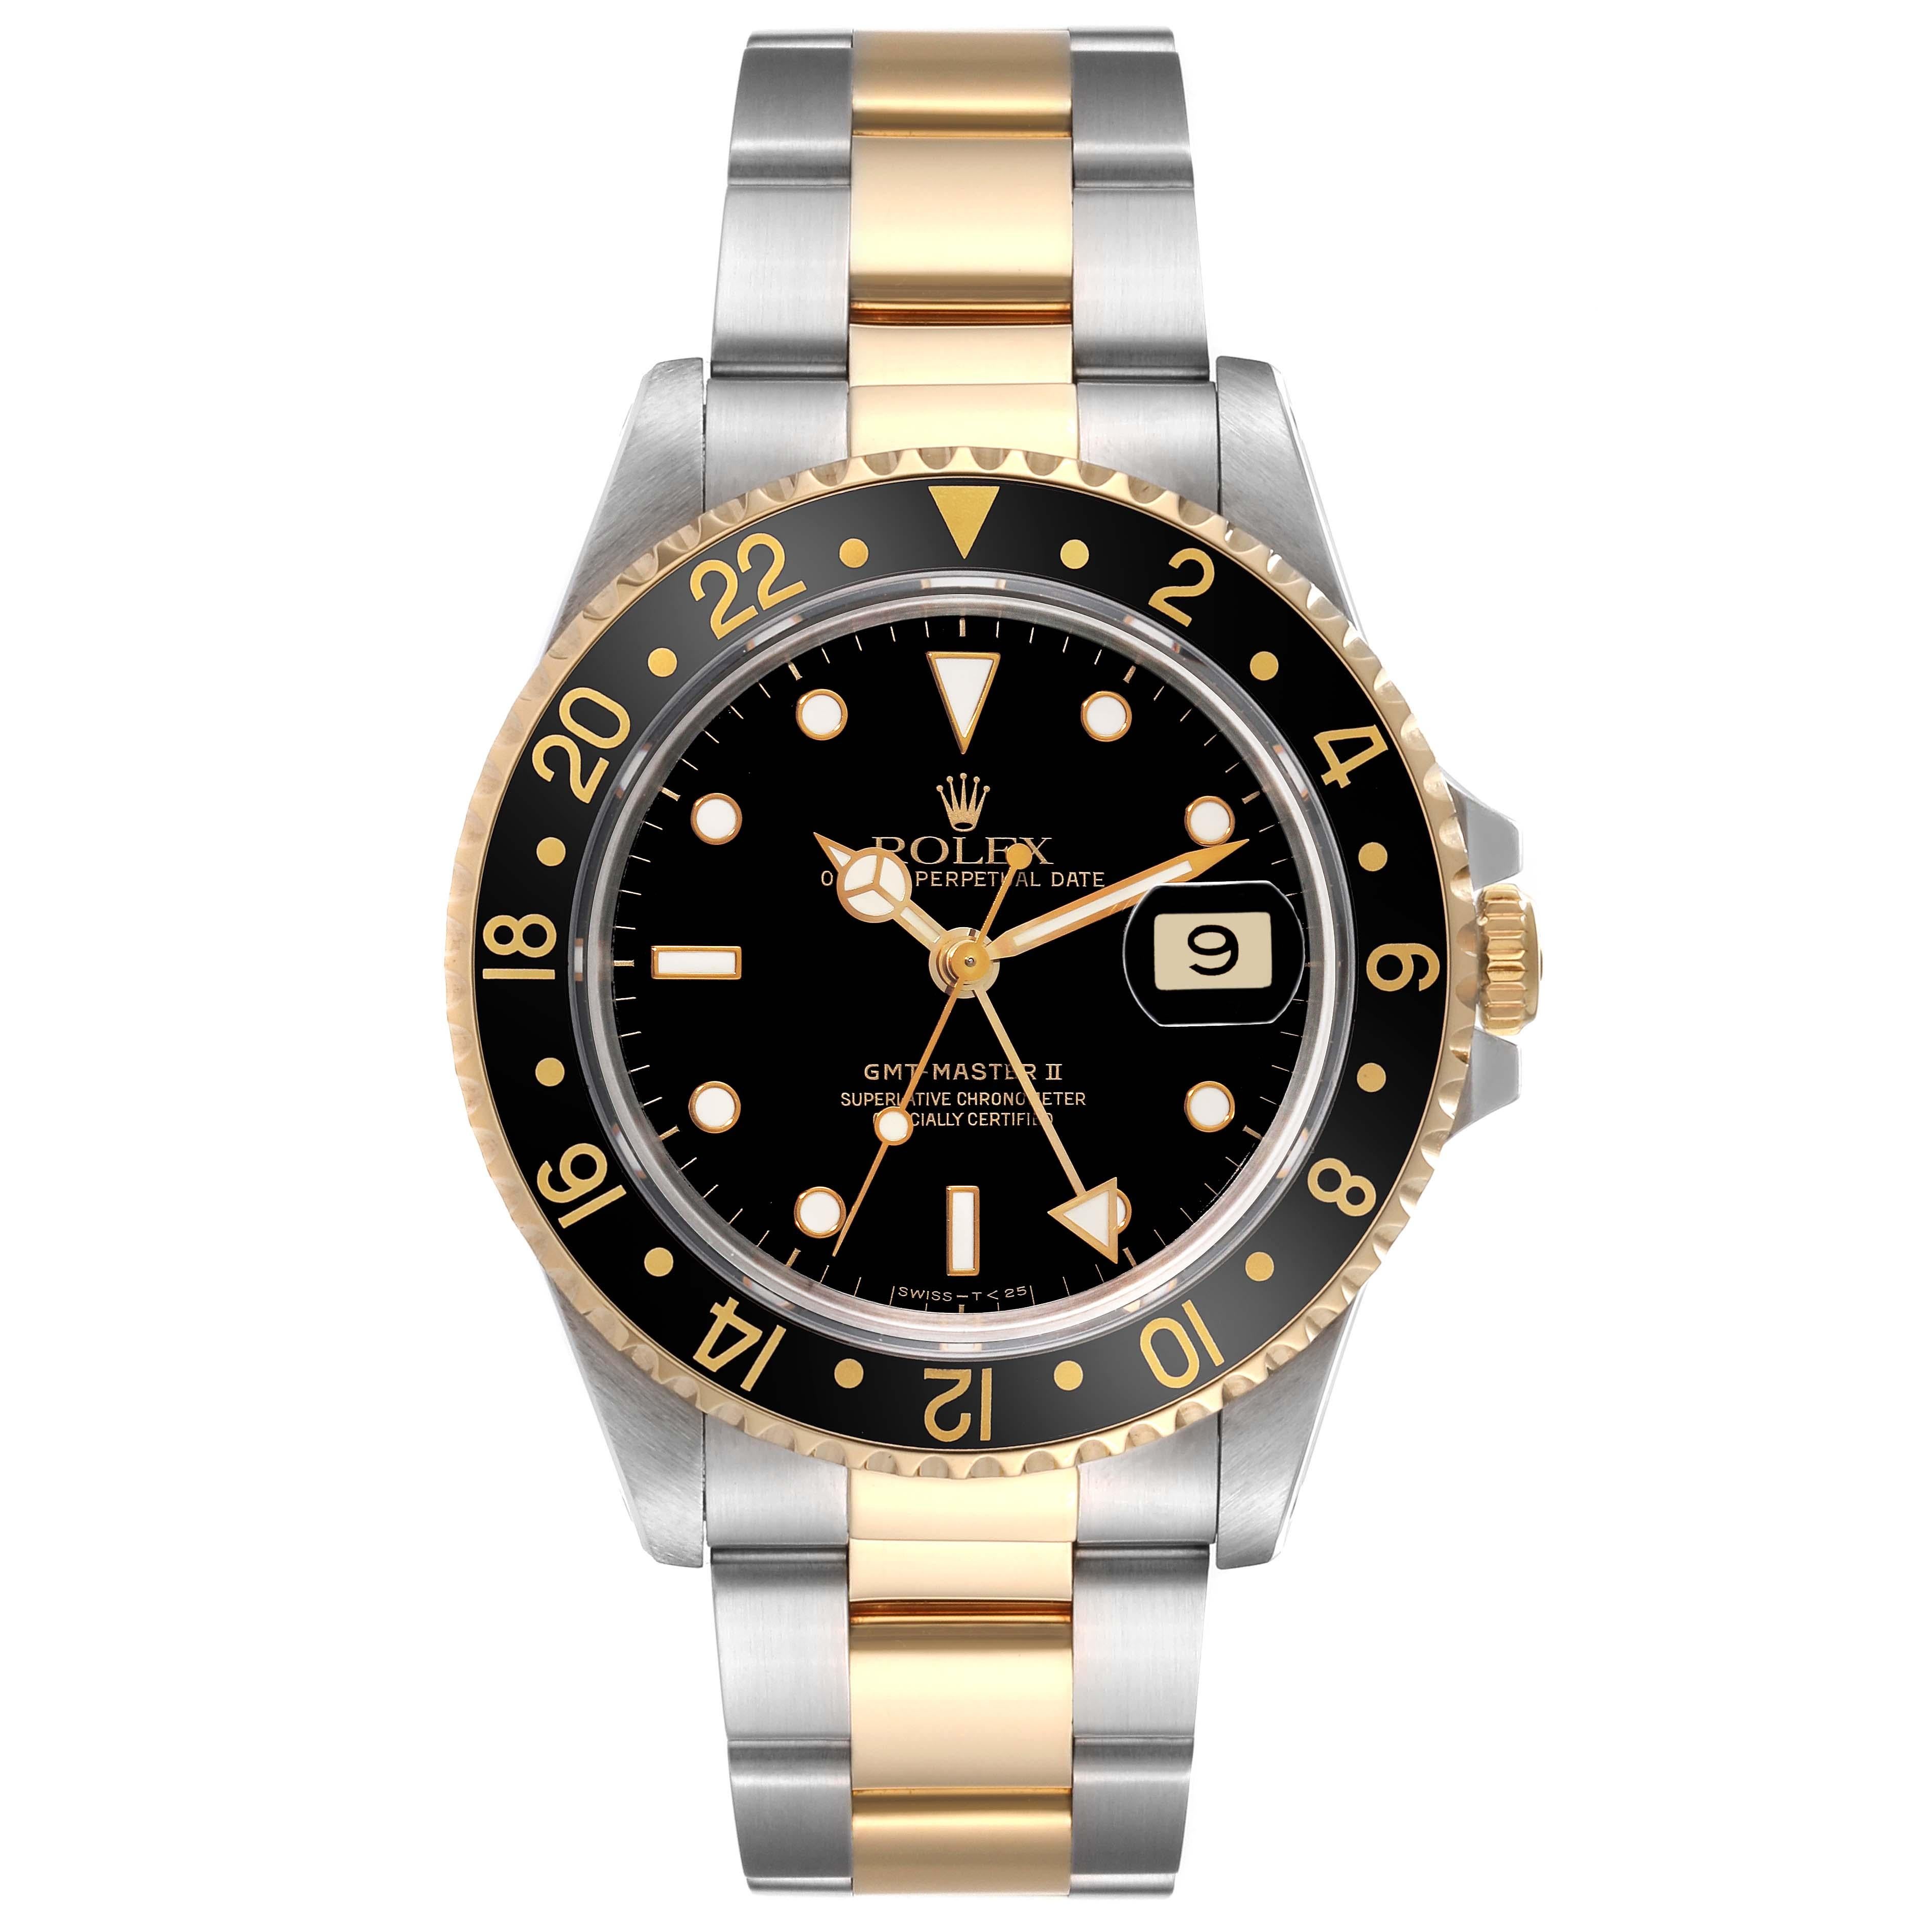 Rolex GMT Master II Yellow Gold Steel Oyster Bracelet Mens Watch 16713 In Excellent Condition For Sale In Atlanta, GA